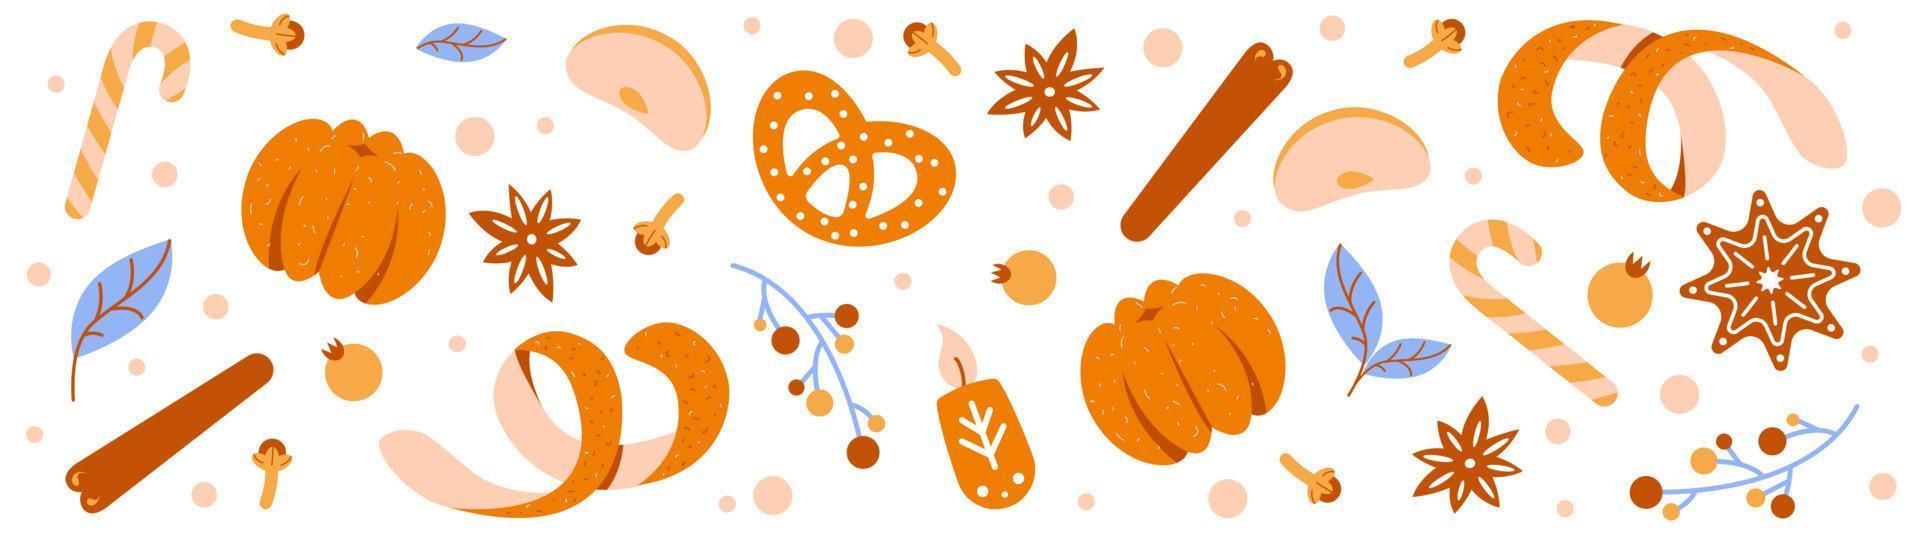 Horizontal Christmas banner. Isolated tangerine, orange, cookies and spices. Pattern for packaging vector